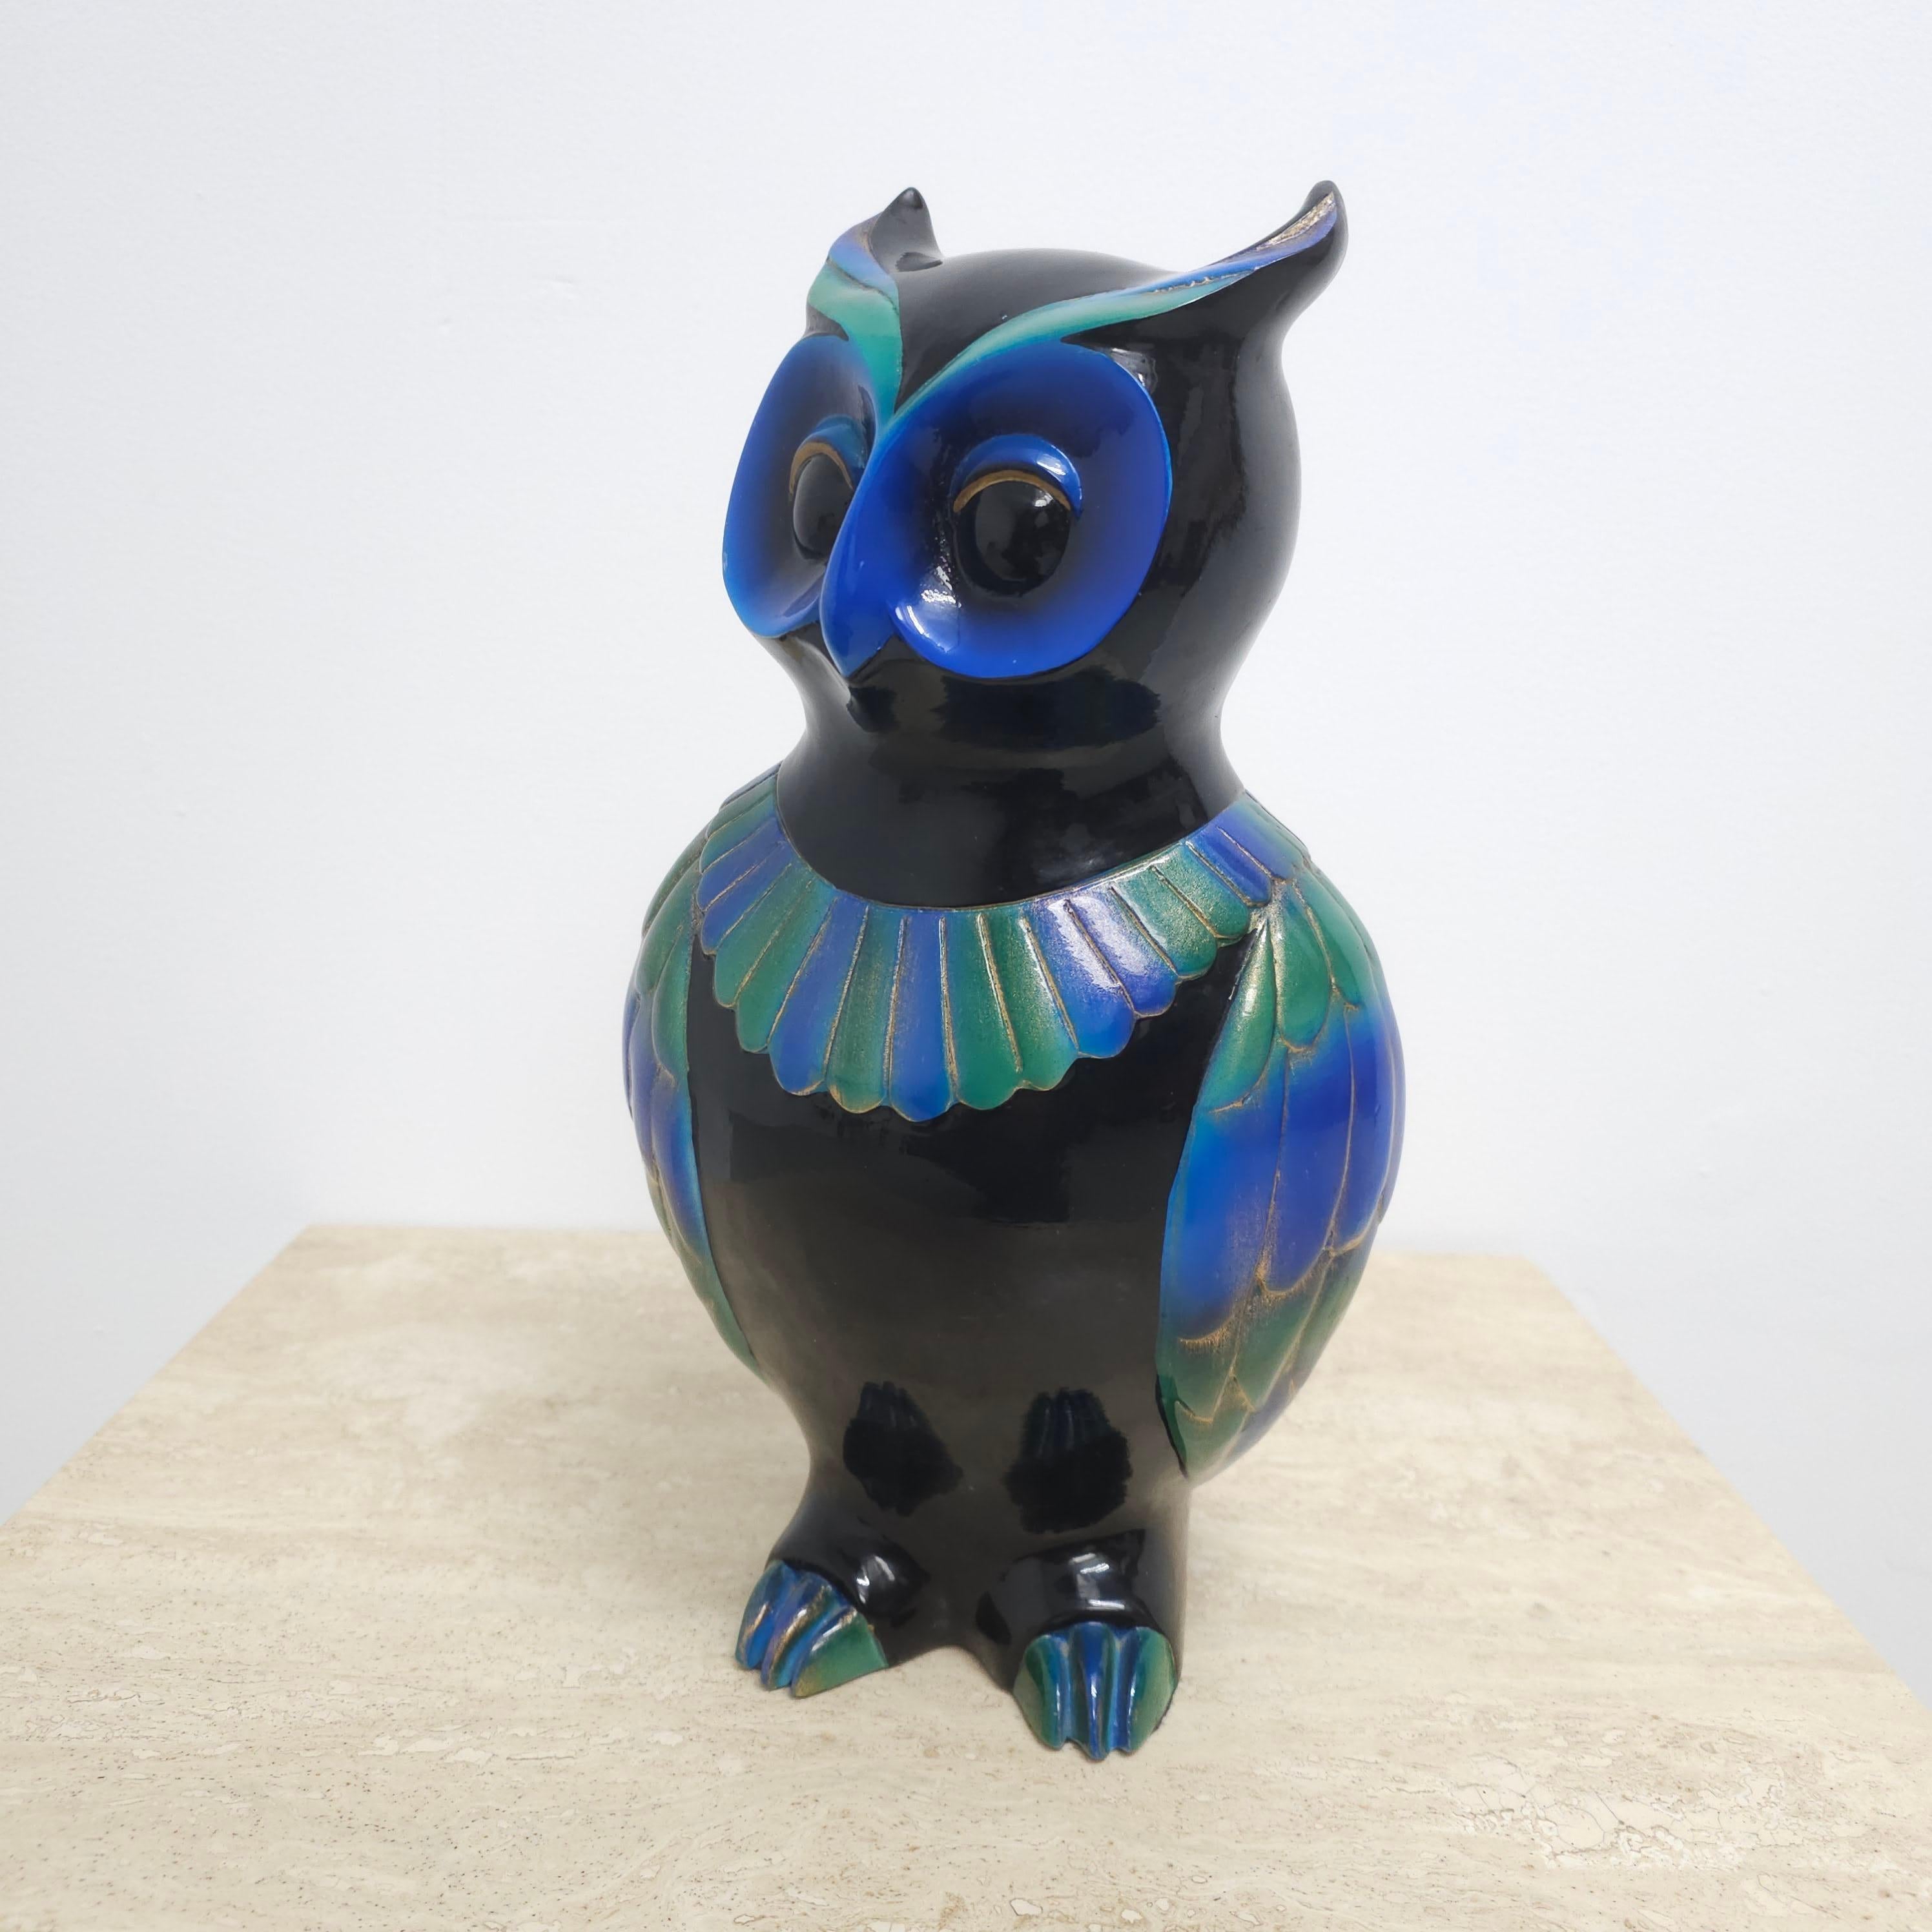 Colorfull hand carved wooden owl. Handmade in Belgium by l'Eau Vive. The base/body is painted in shiny black with strong shiny blue and green in the face and wings, hatched with golden lines and touches. The wood is very thick painted so you almost